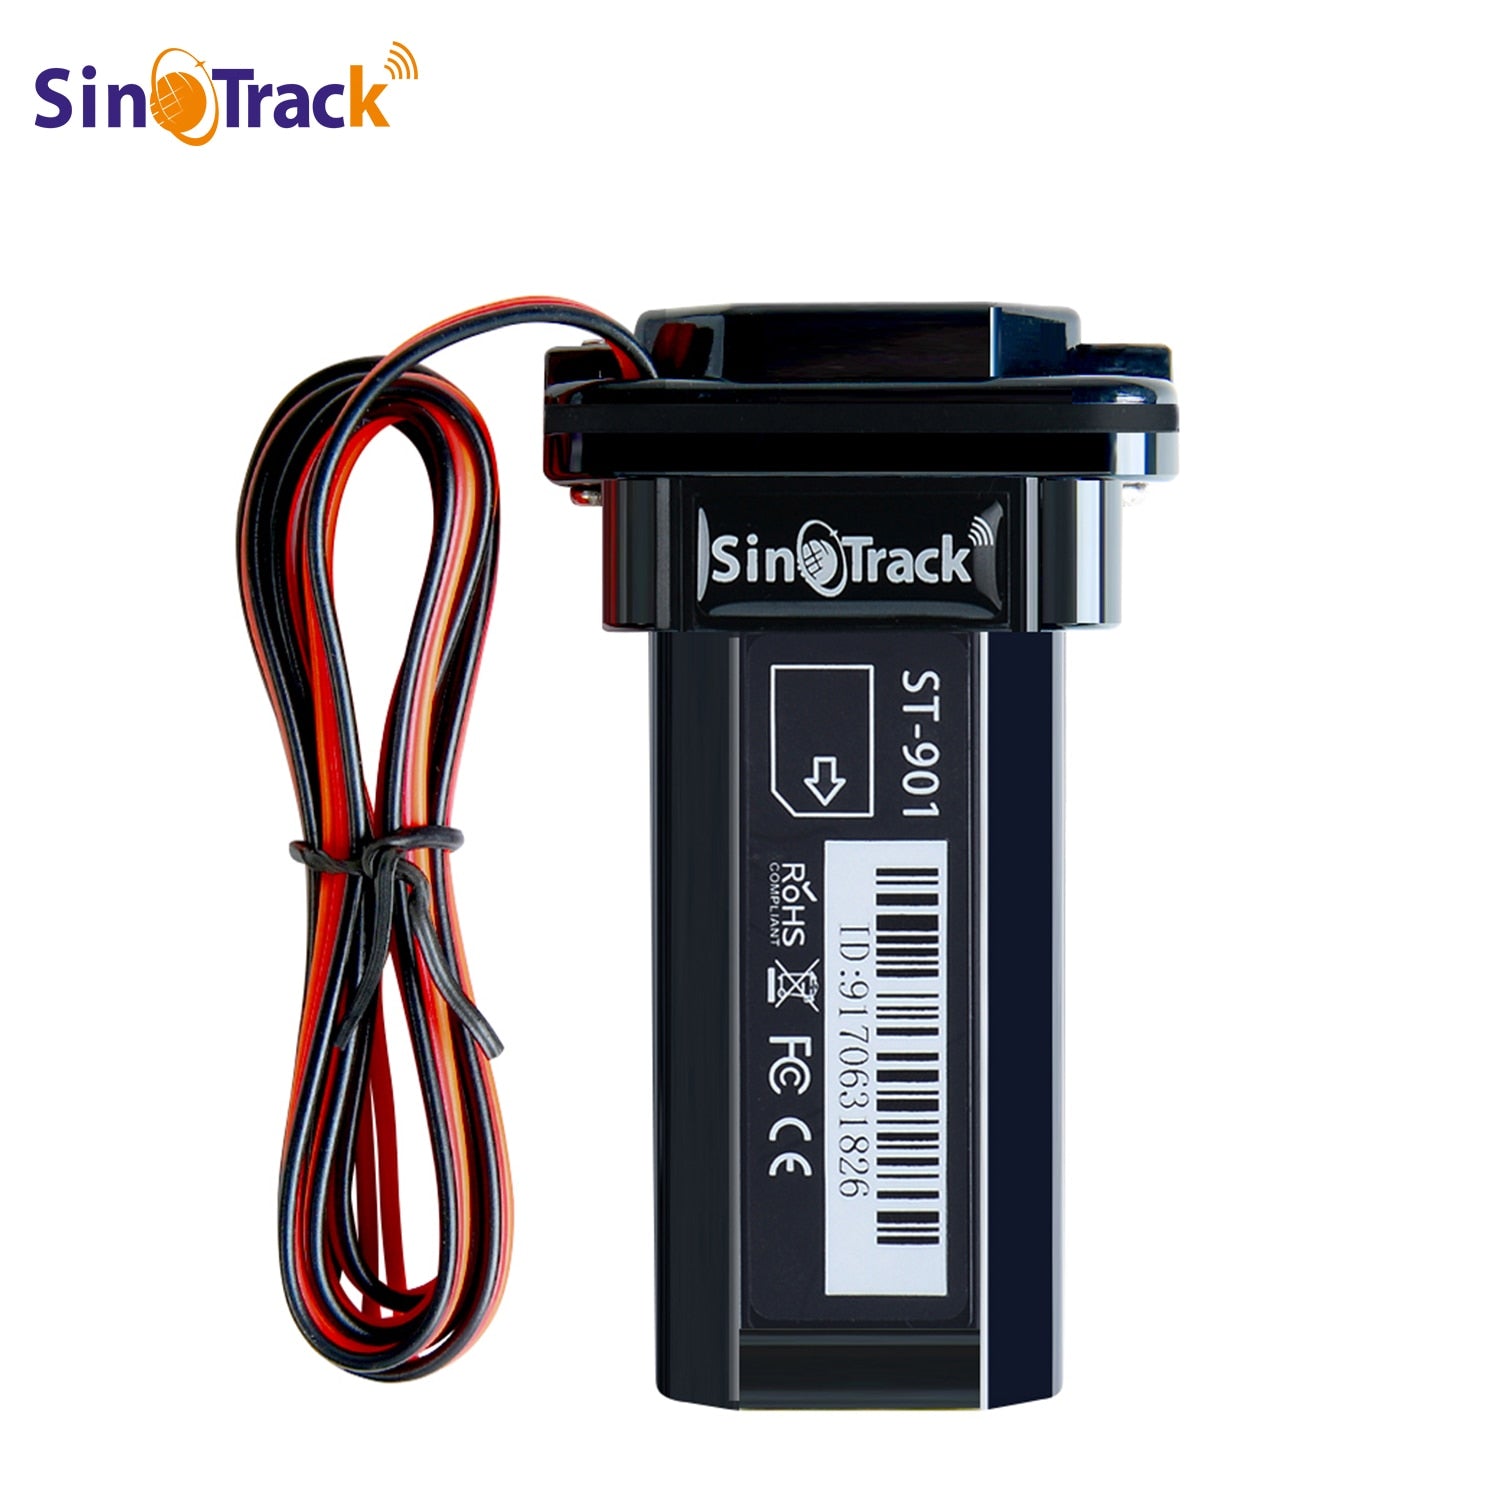 GSM GPS tracker Mini Waterproof Builtin Battery for Car motorcycle vehicle 3G WCDMA device with online tracking software